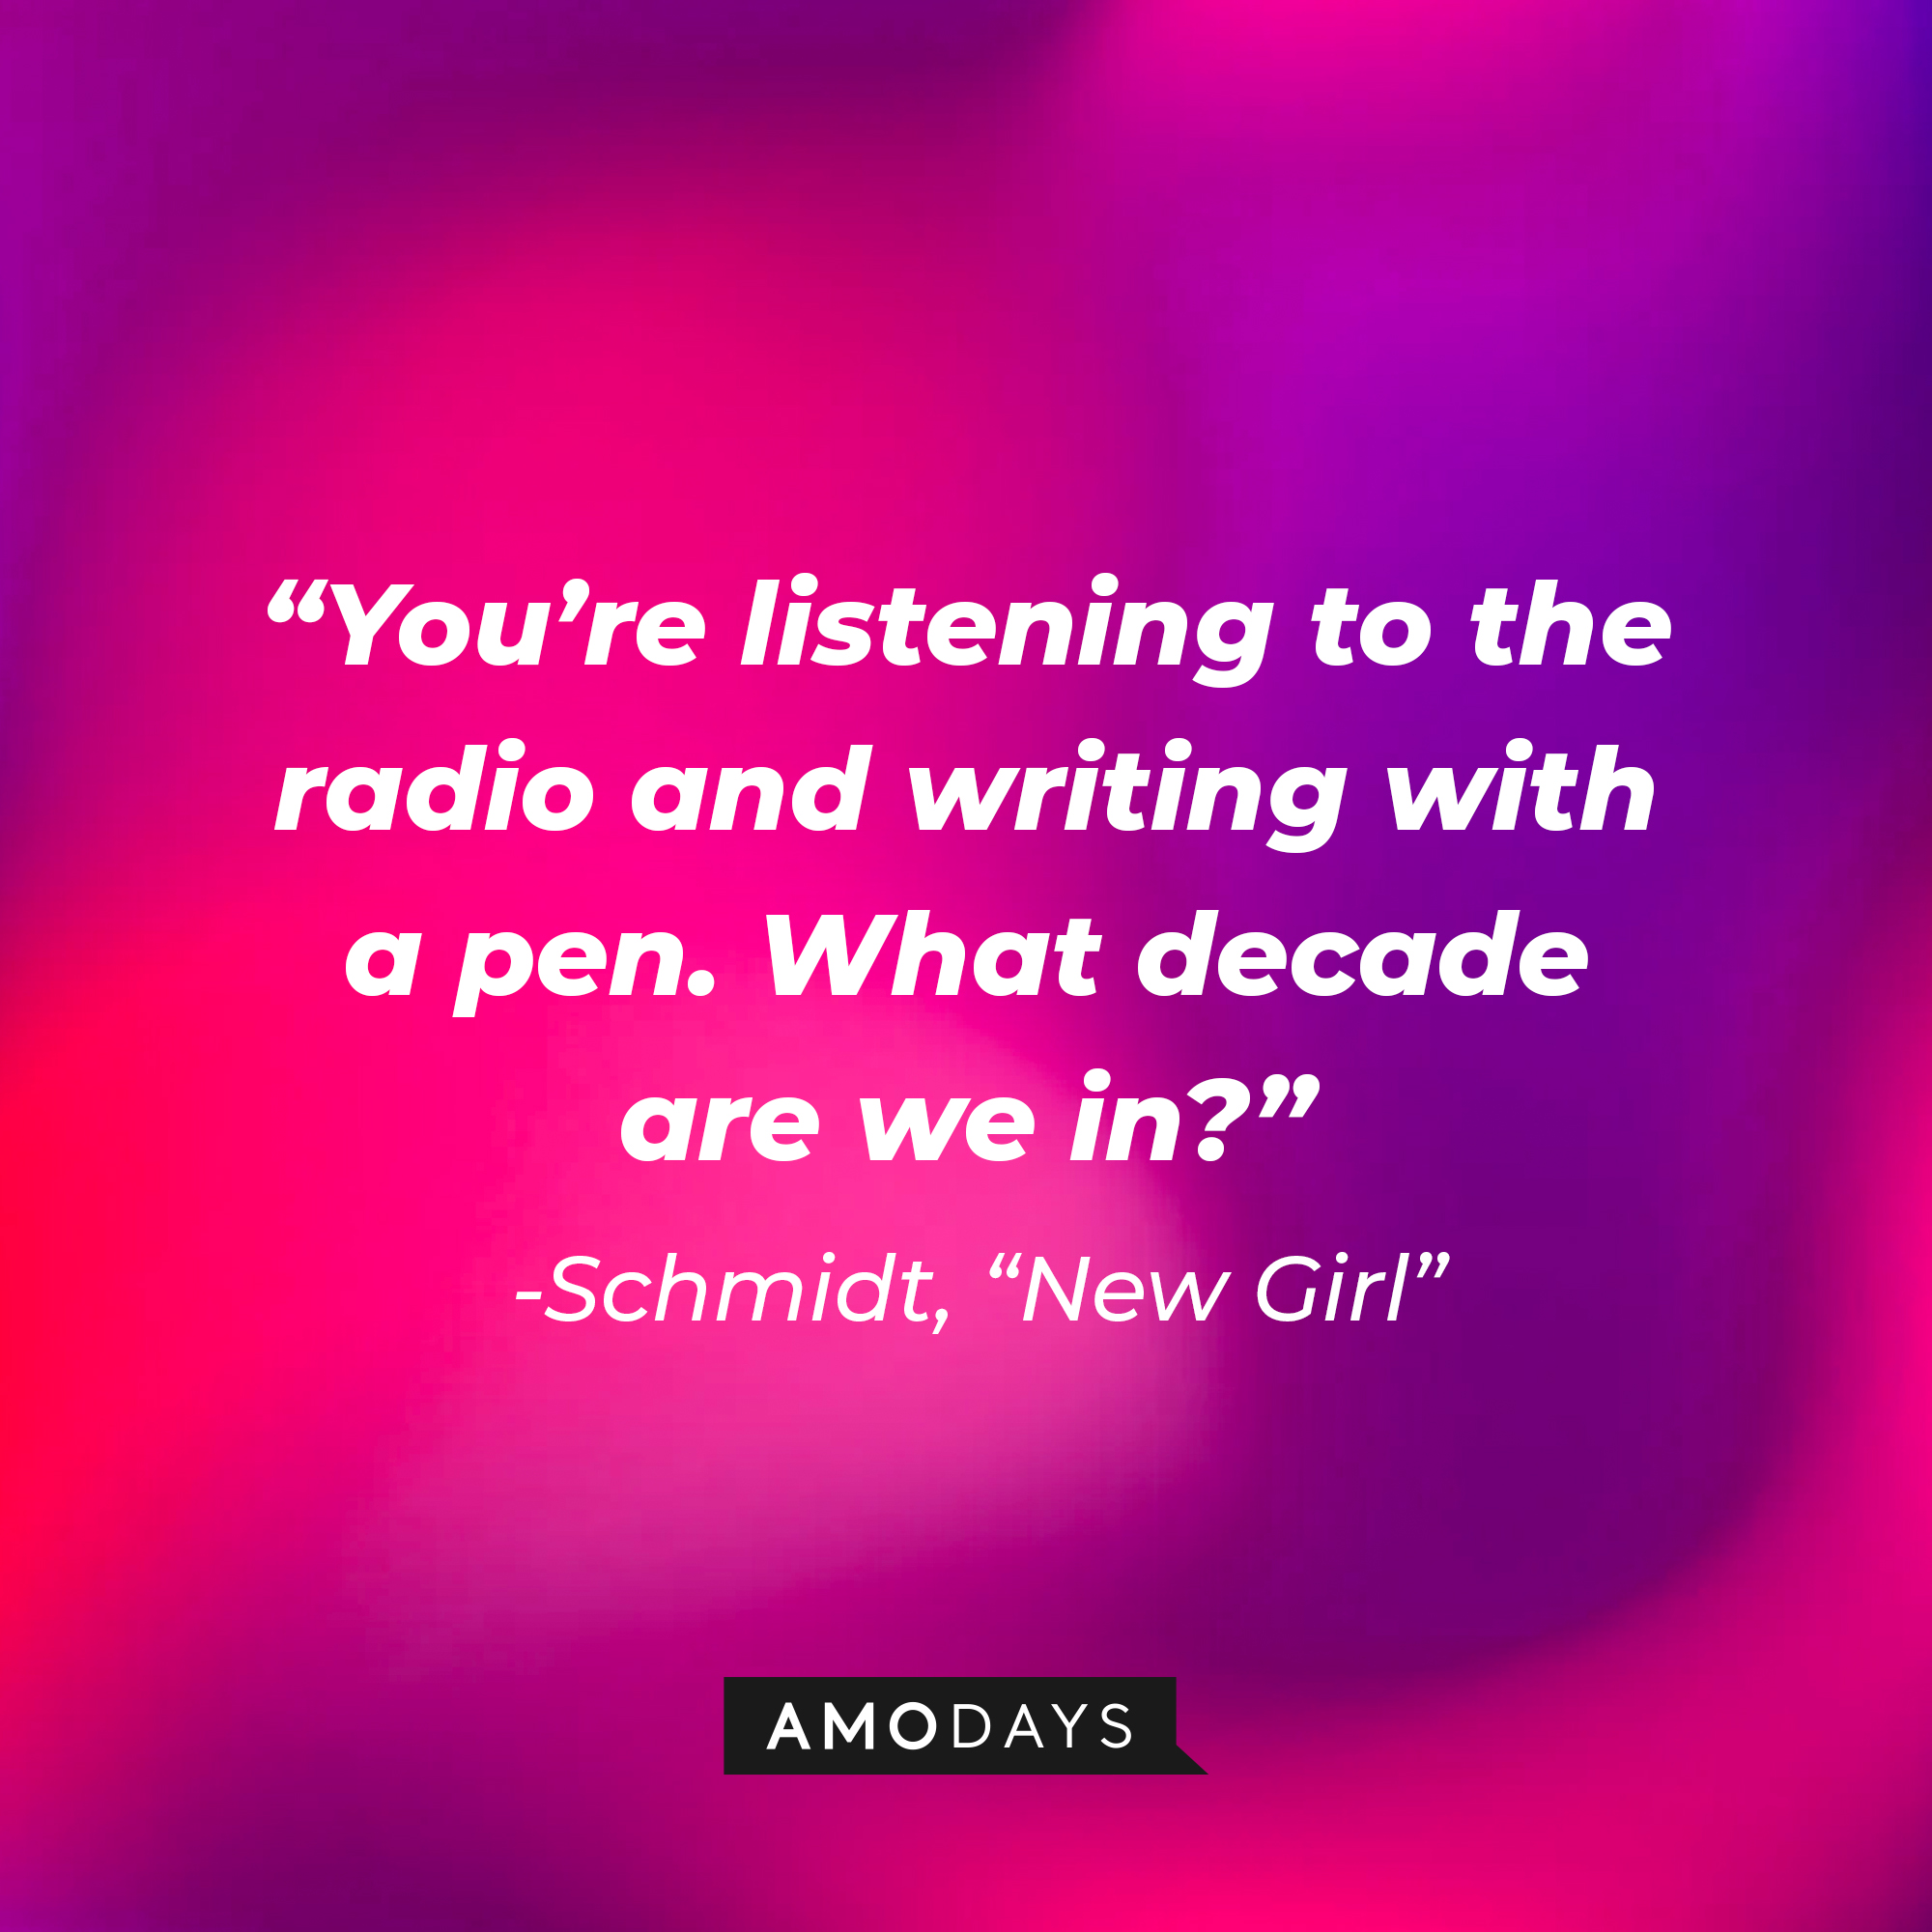 Schmidt's quote: "You’re listening to the radio and writing with a pen. What decade are we in?" | Source: Amodays